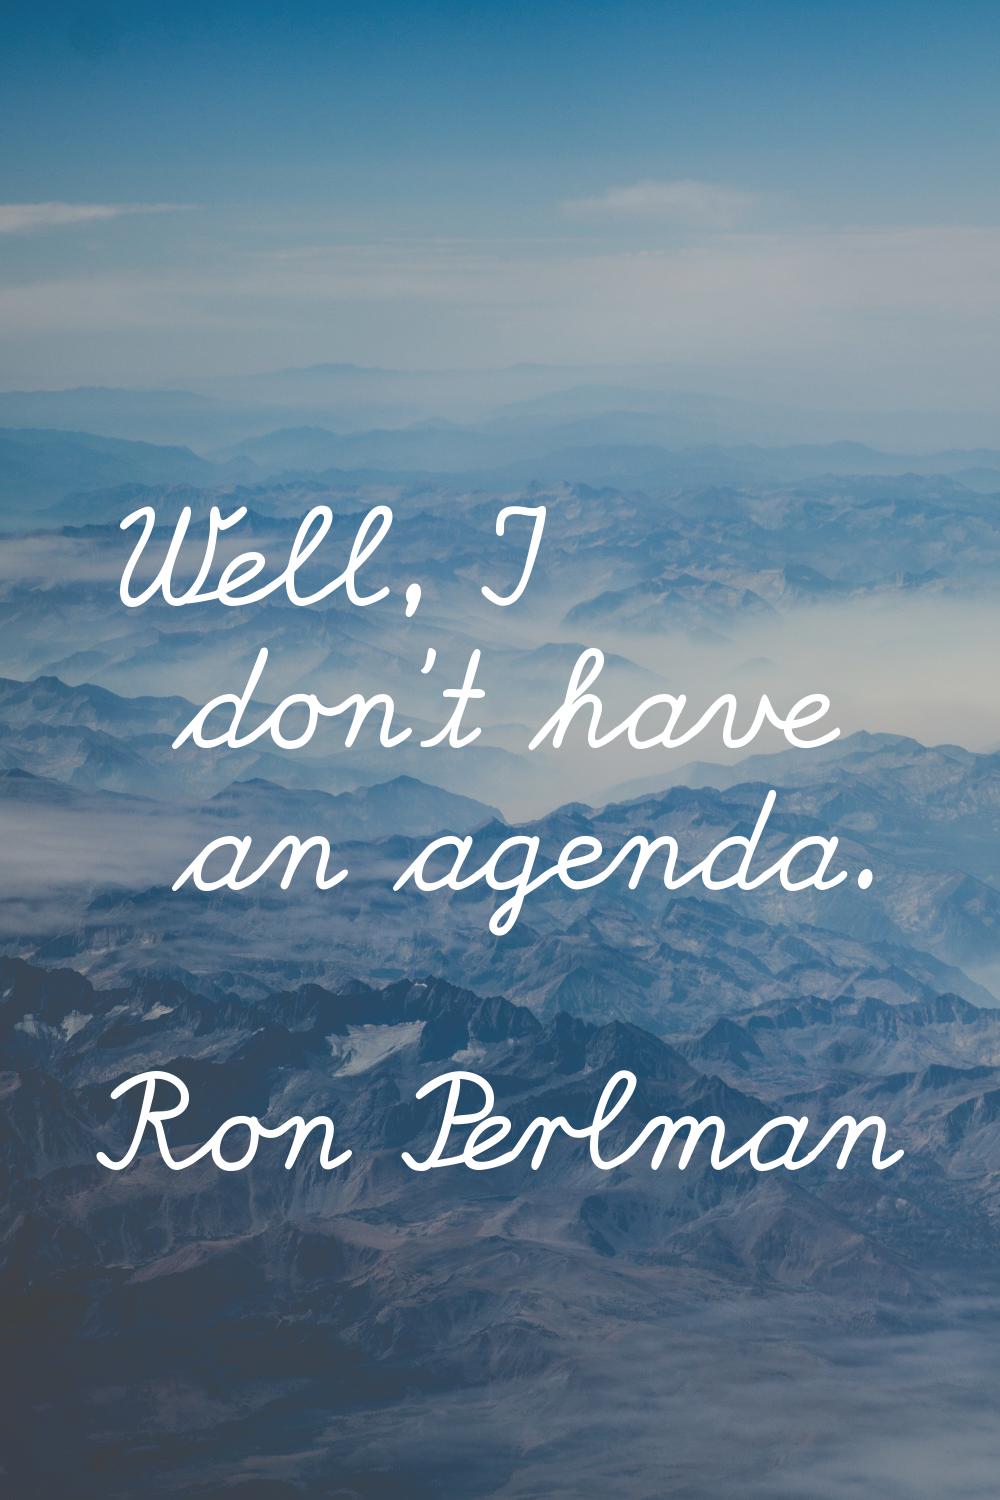 Well, I don't have an agenda.